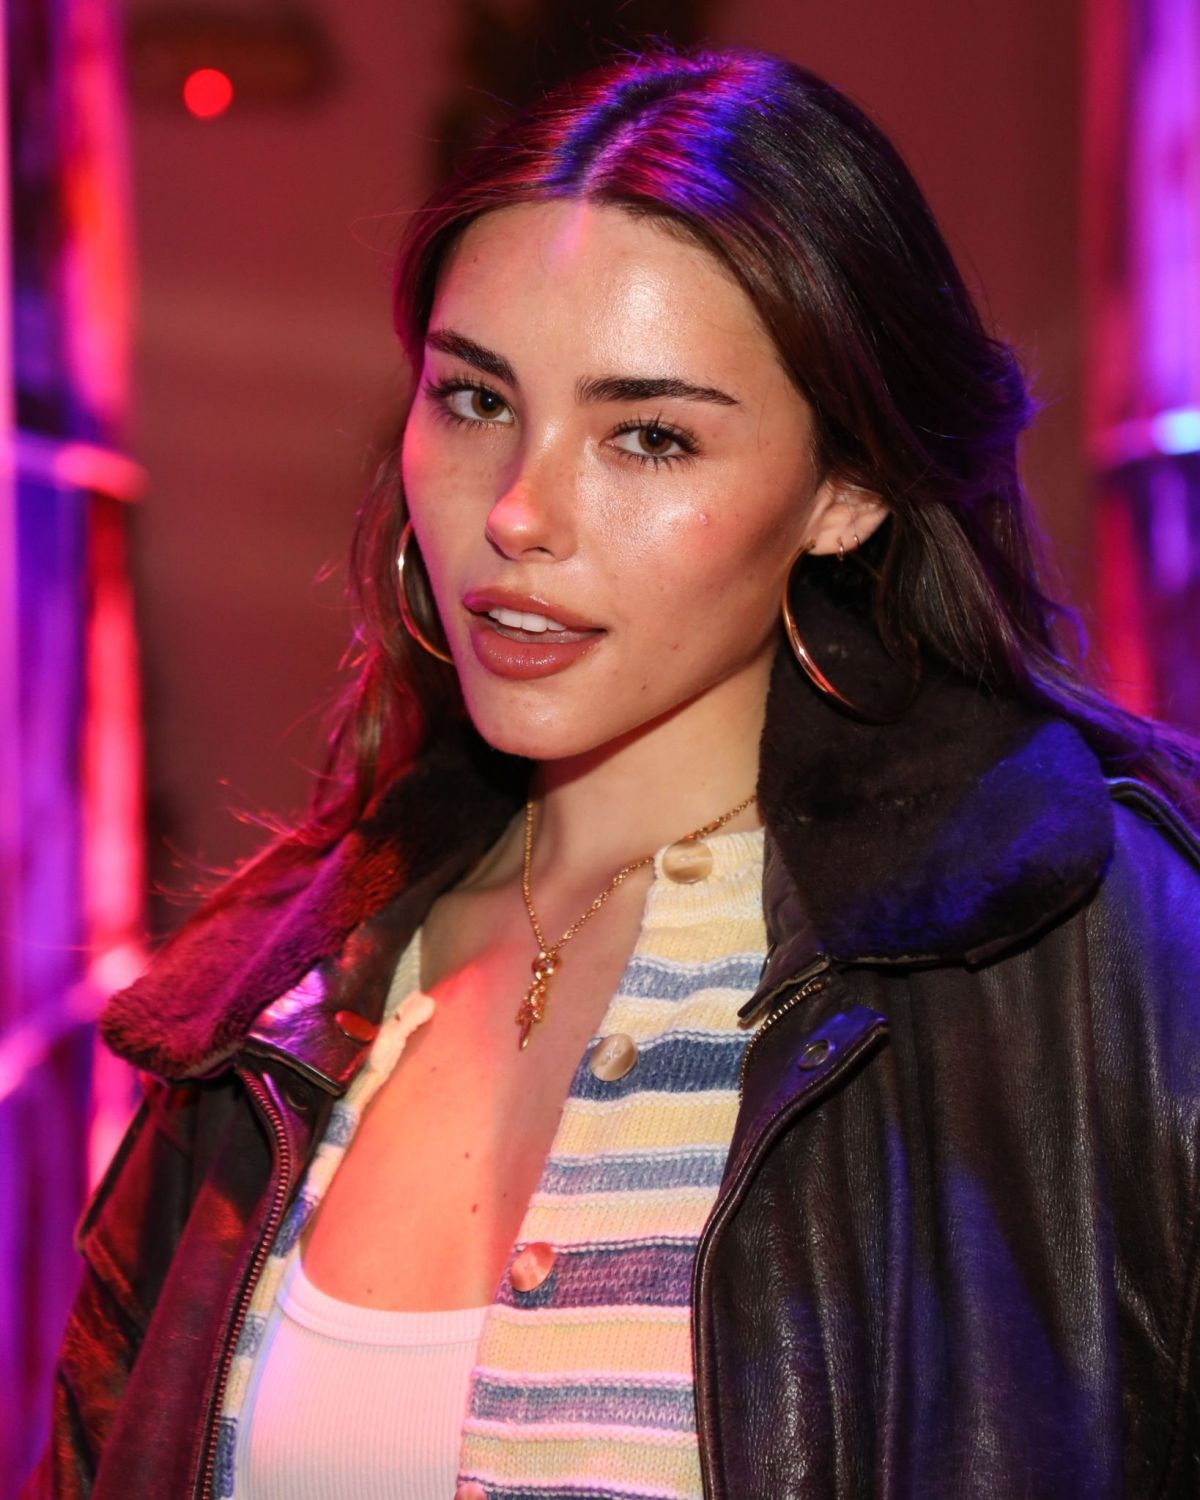 MADISON BEER at Eladay Launch Party in Los Angeles 02/226/2023 – HawtCelebs